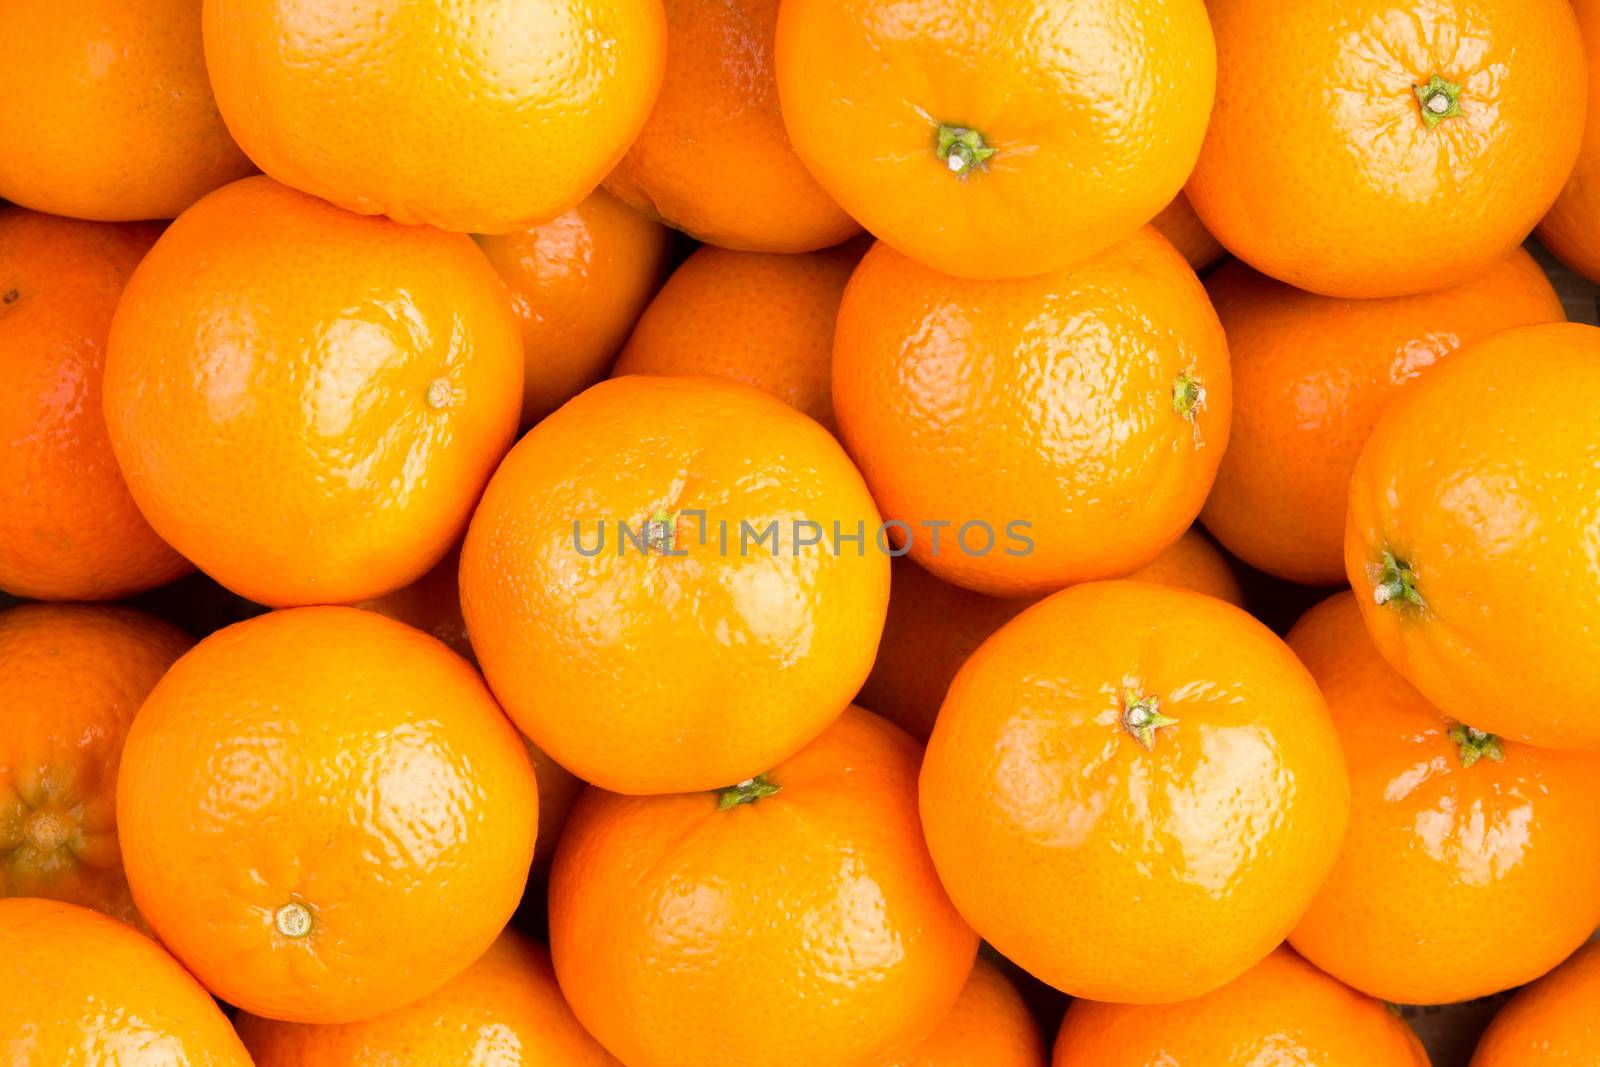 Food background of fresh healthy ripe orange clementines, tangerines or mandarins in a full frame view rich in vitamin c